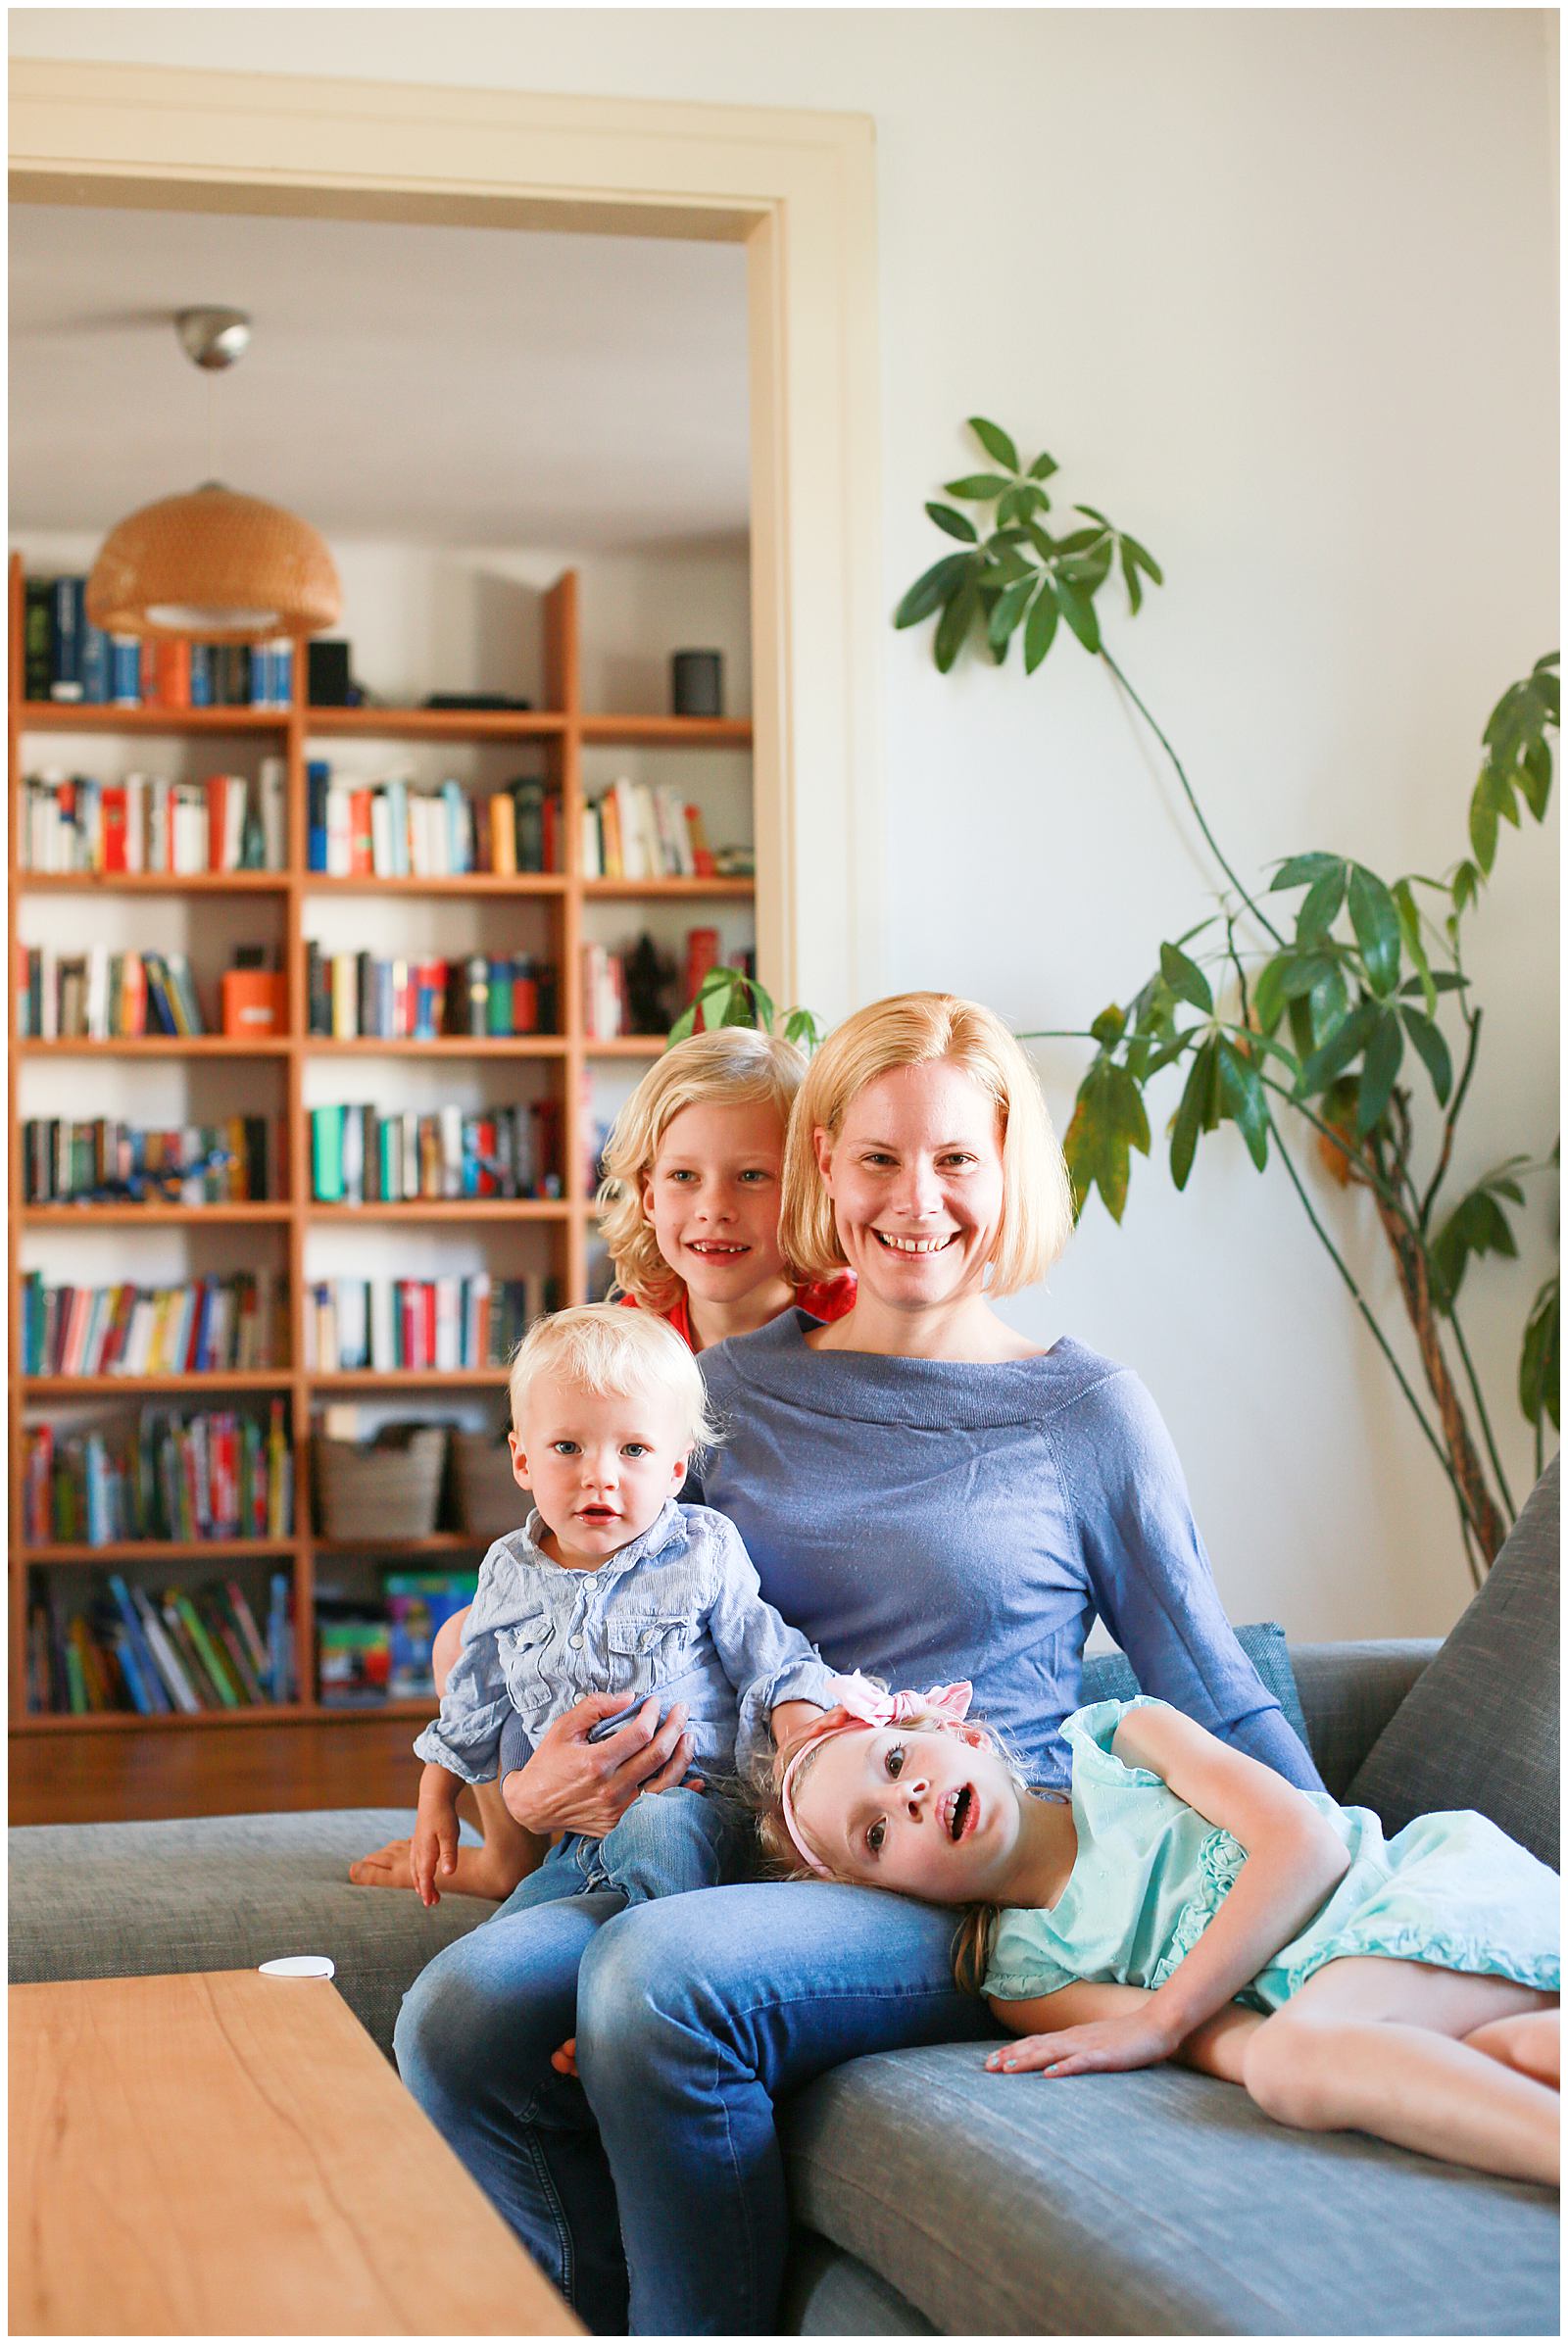 lifestyle family photos at home in living room in France